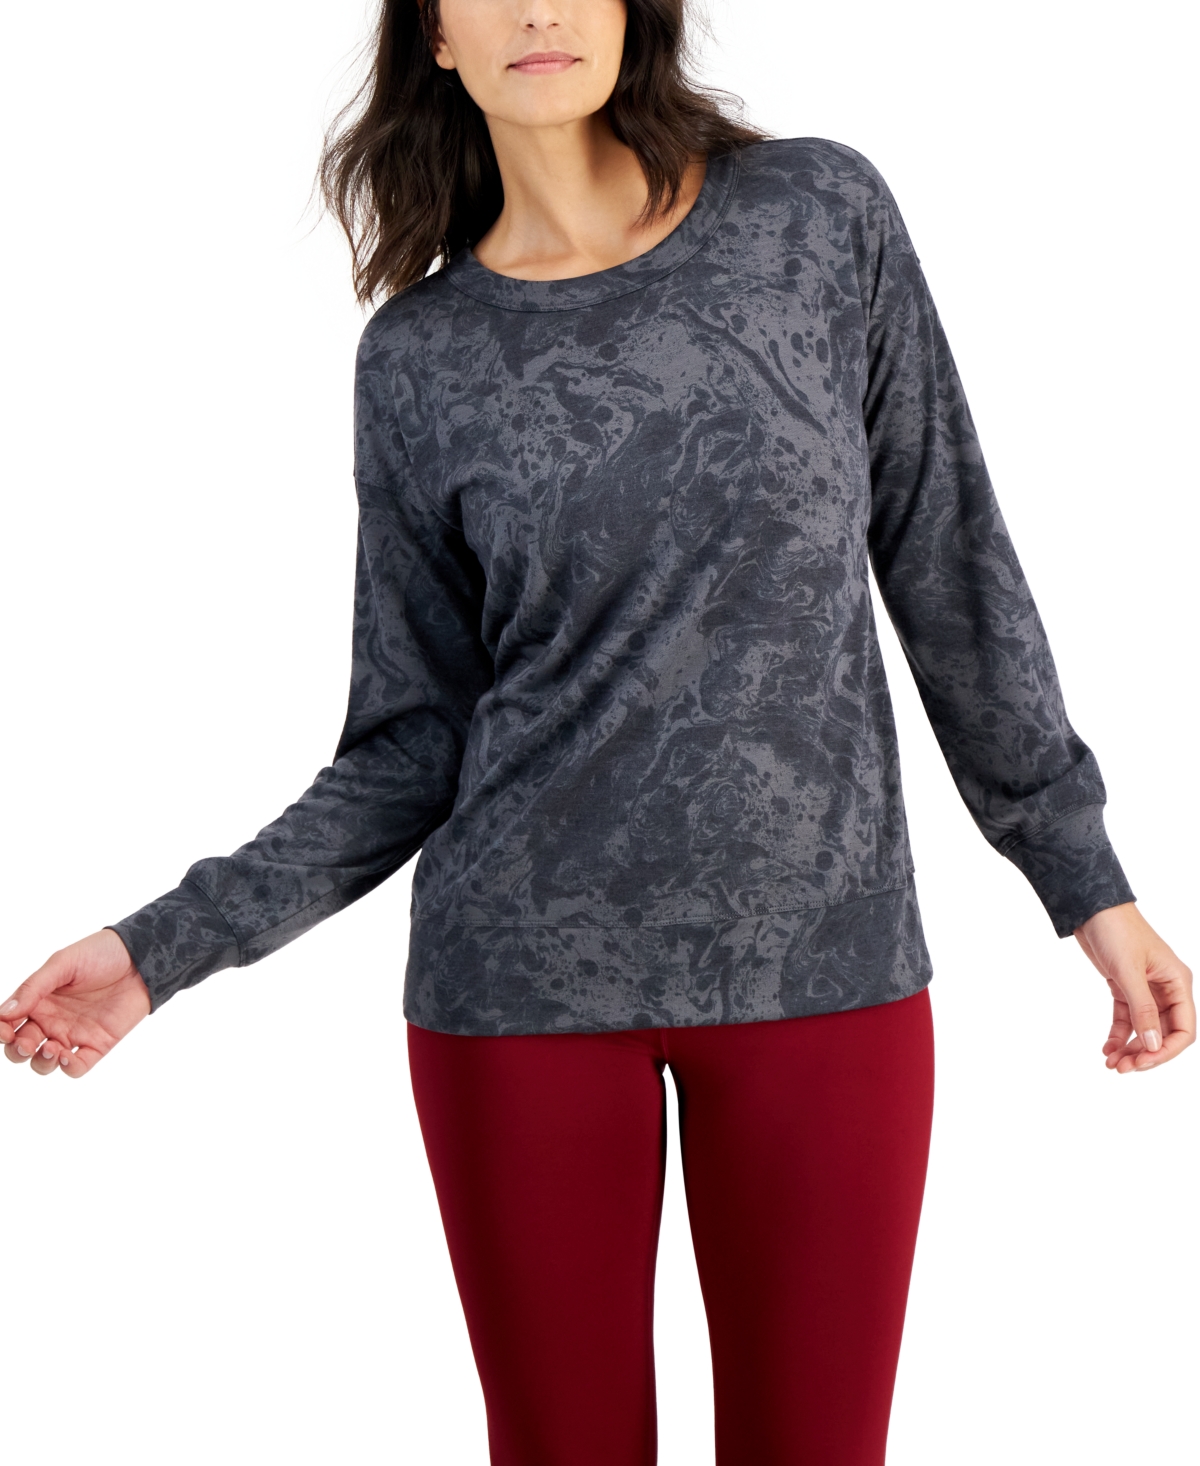 Women's Butter French Terry Open-Back Pullover Top, Created for Macy's - Water Bubbles